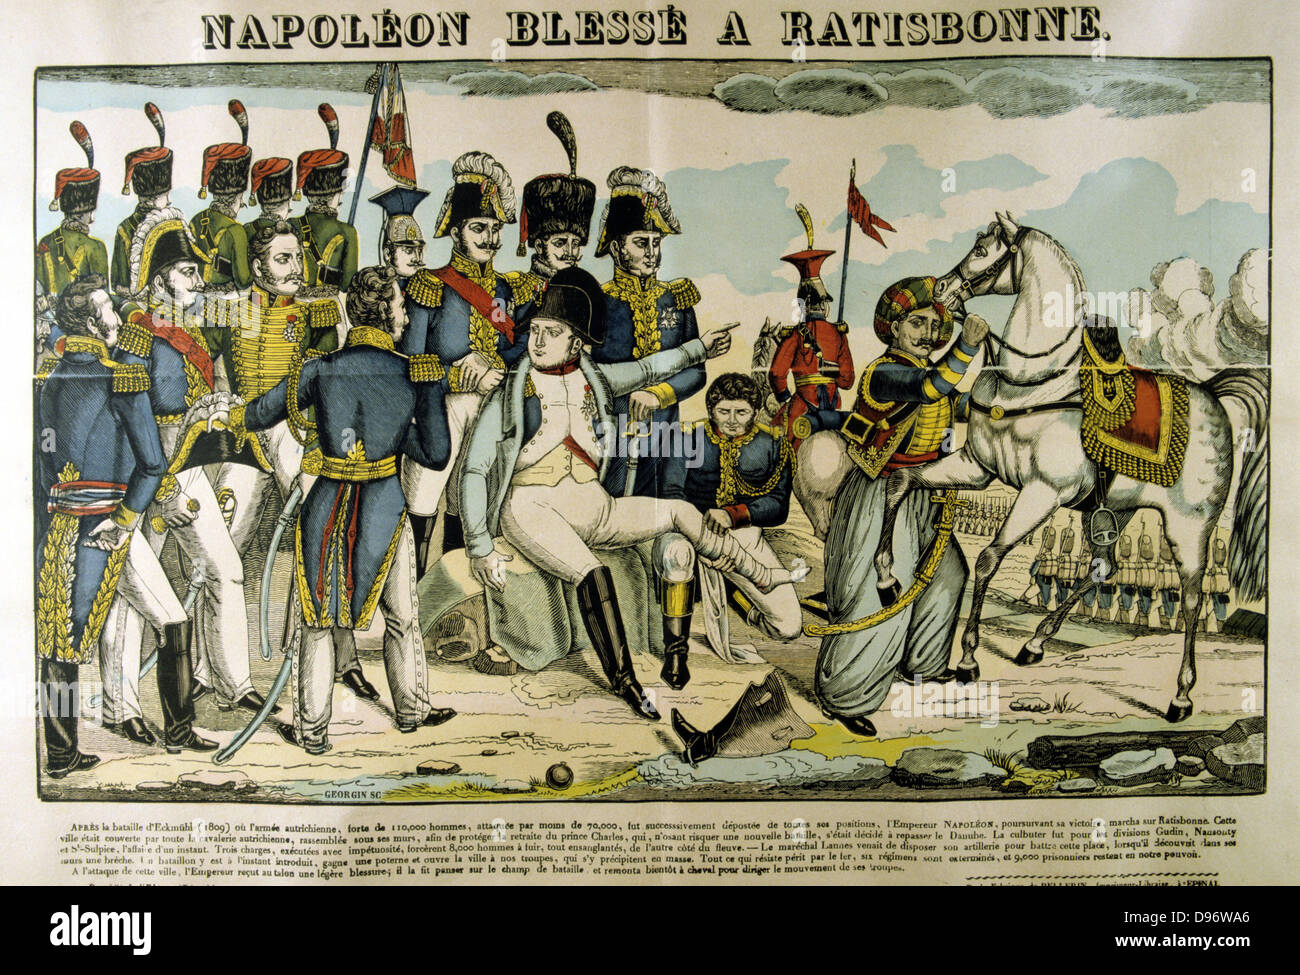 Battle of Ratisbon (Regensburg) 19-23 April 1809. French under Baron de Coutard defeated the Austrians under Archduke Charles. Napoleon I wounded in the ankle. Popular French hand-coloured woodcut. Stock Photo